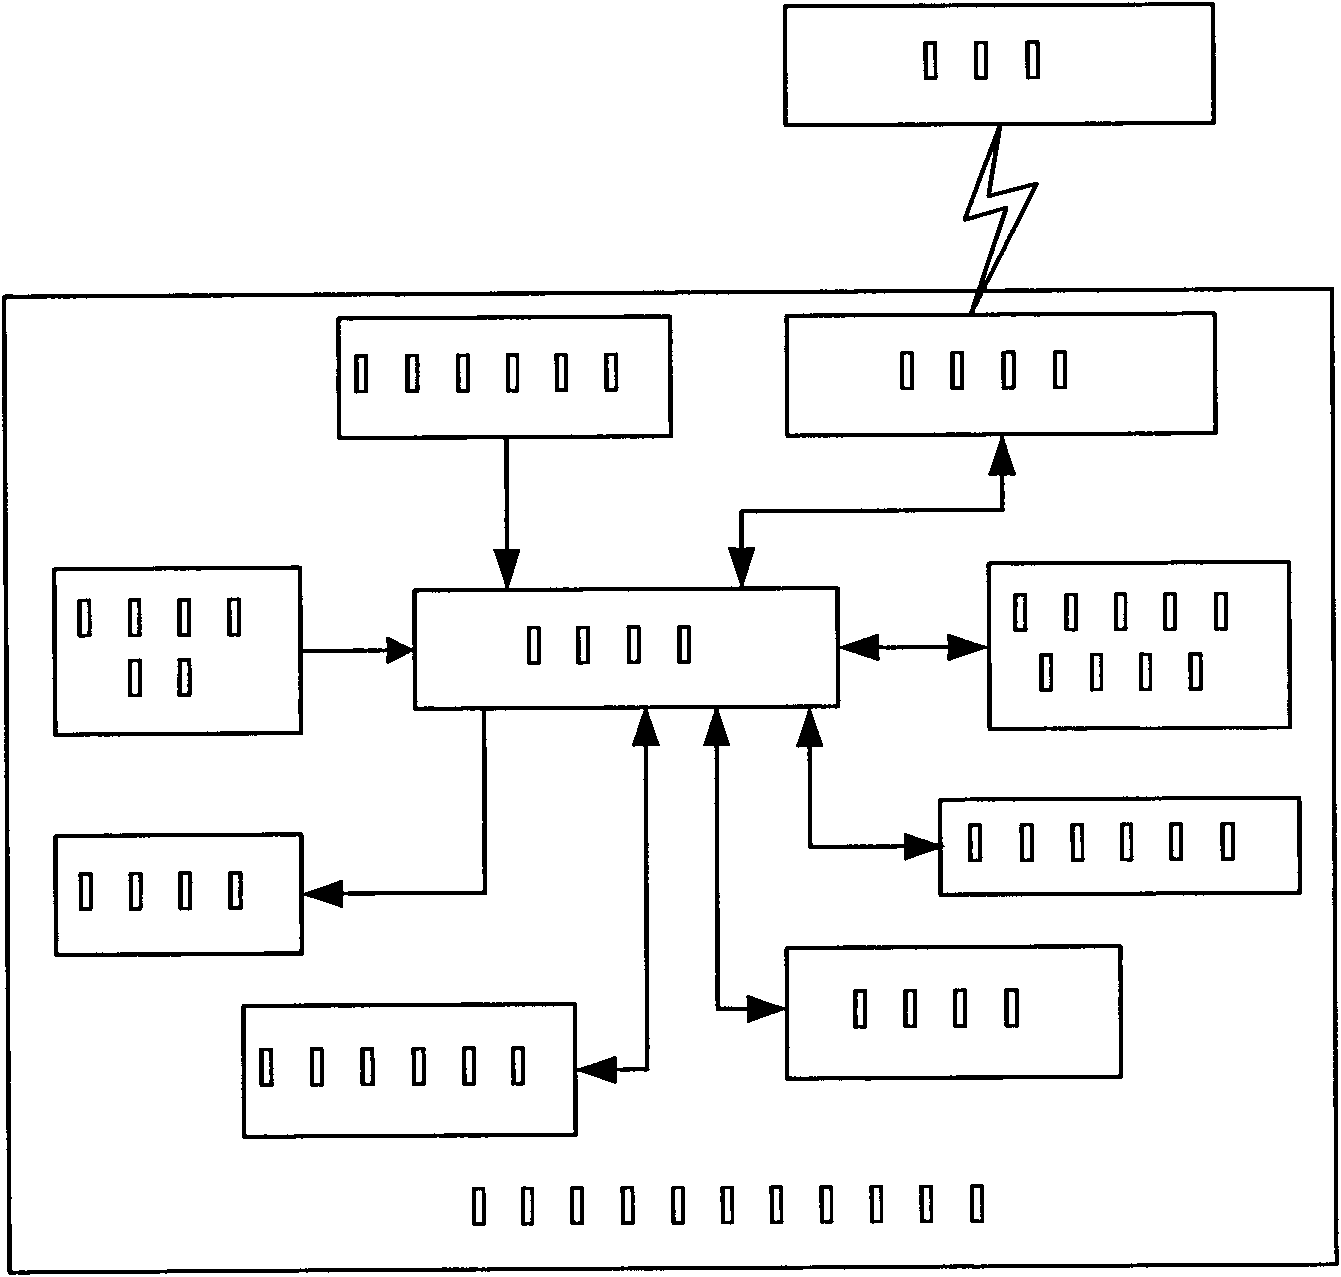 Road sign recognition system and method